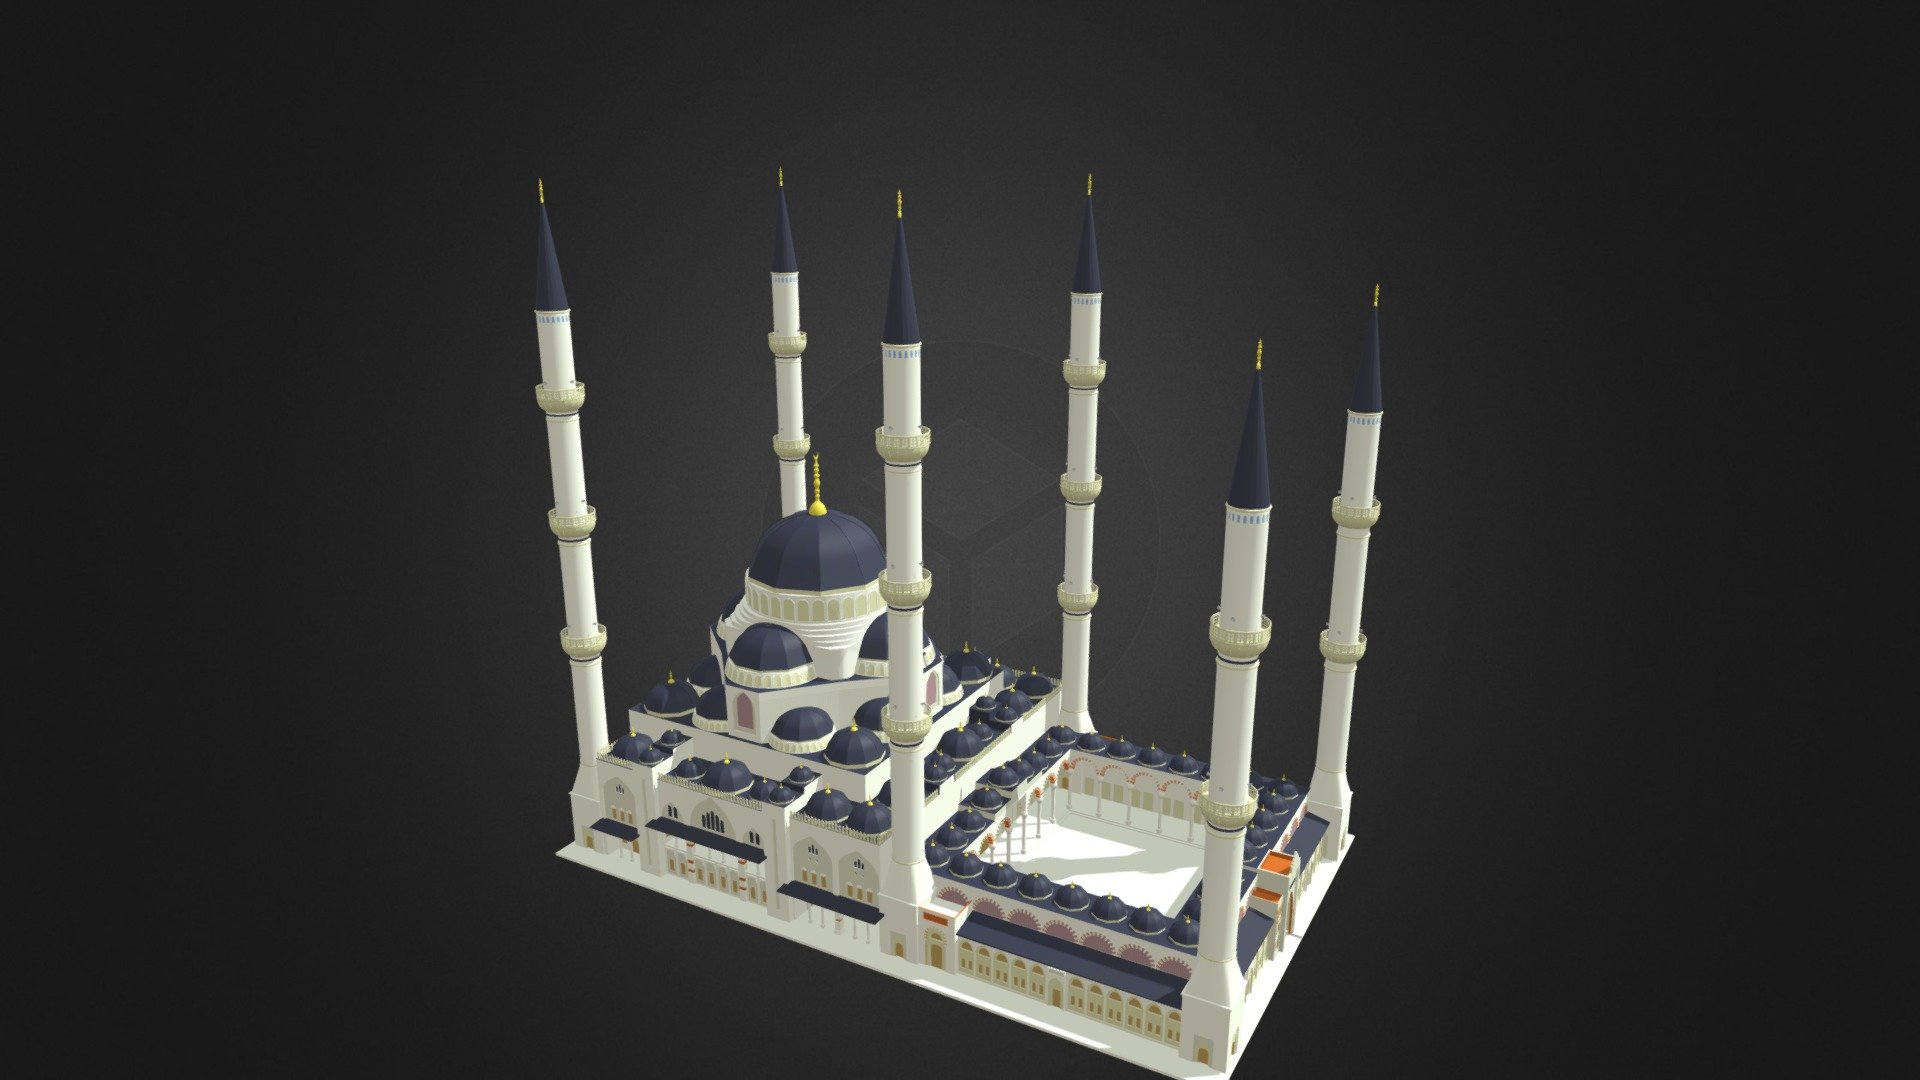 Contact us on Mail : chouaaib.baba1995@gmail.com
Facebook Account : https://www.facebook.com/choaib.bc
Facebook Page : fb.me/Chou3D

Support us on Patreon : 
http://www.patreon.com/Chouaaib95 - Istanbul New Grand Mosque - 3D model by Chouaaib.Babaoui 3d model